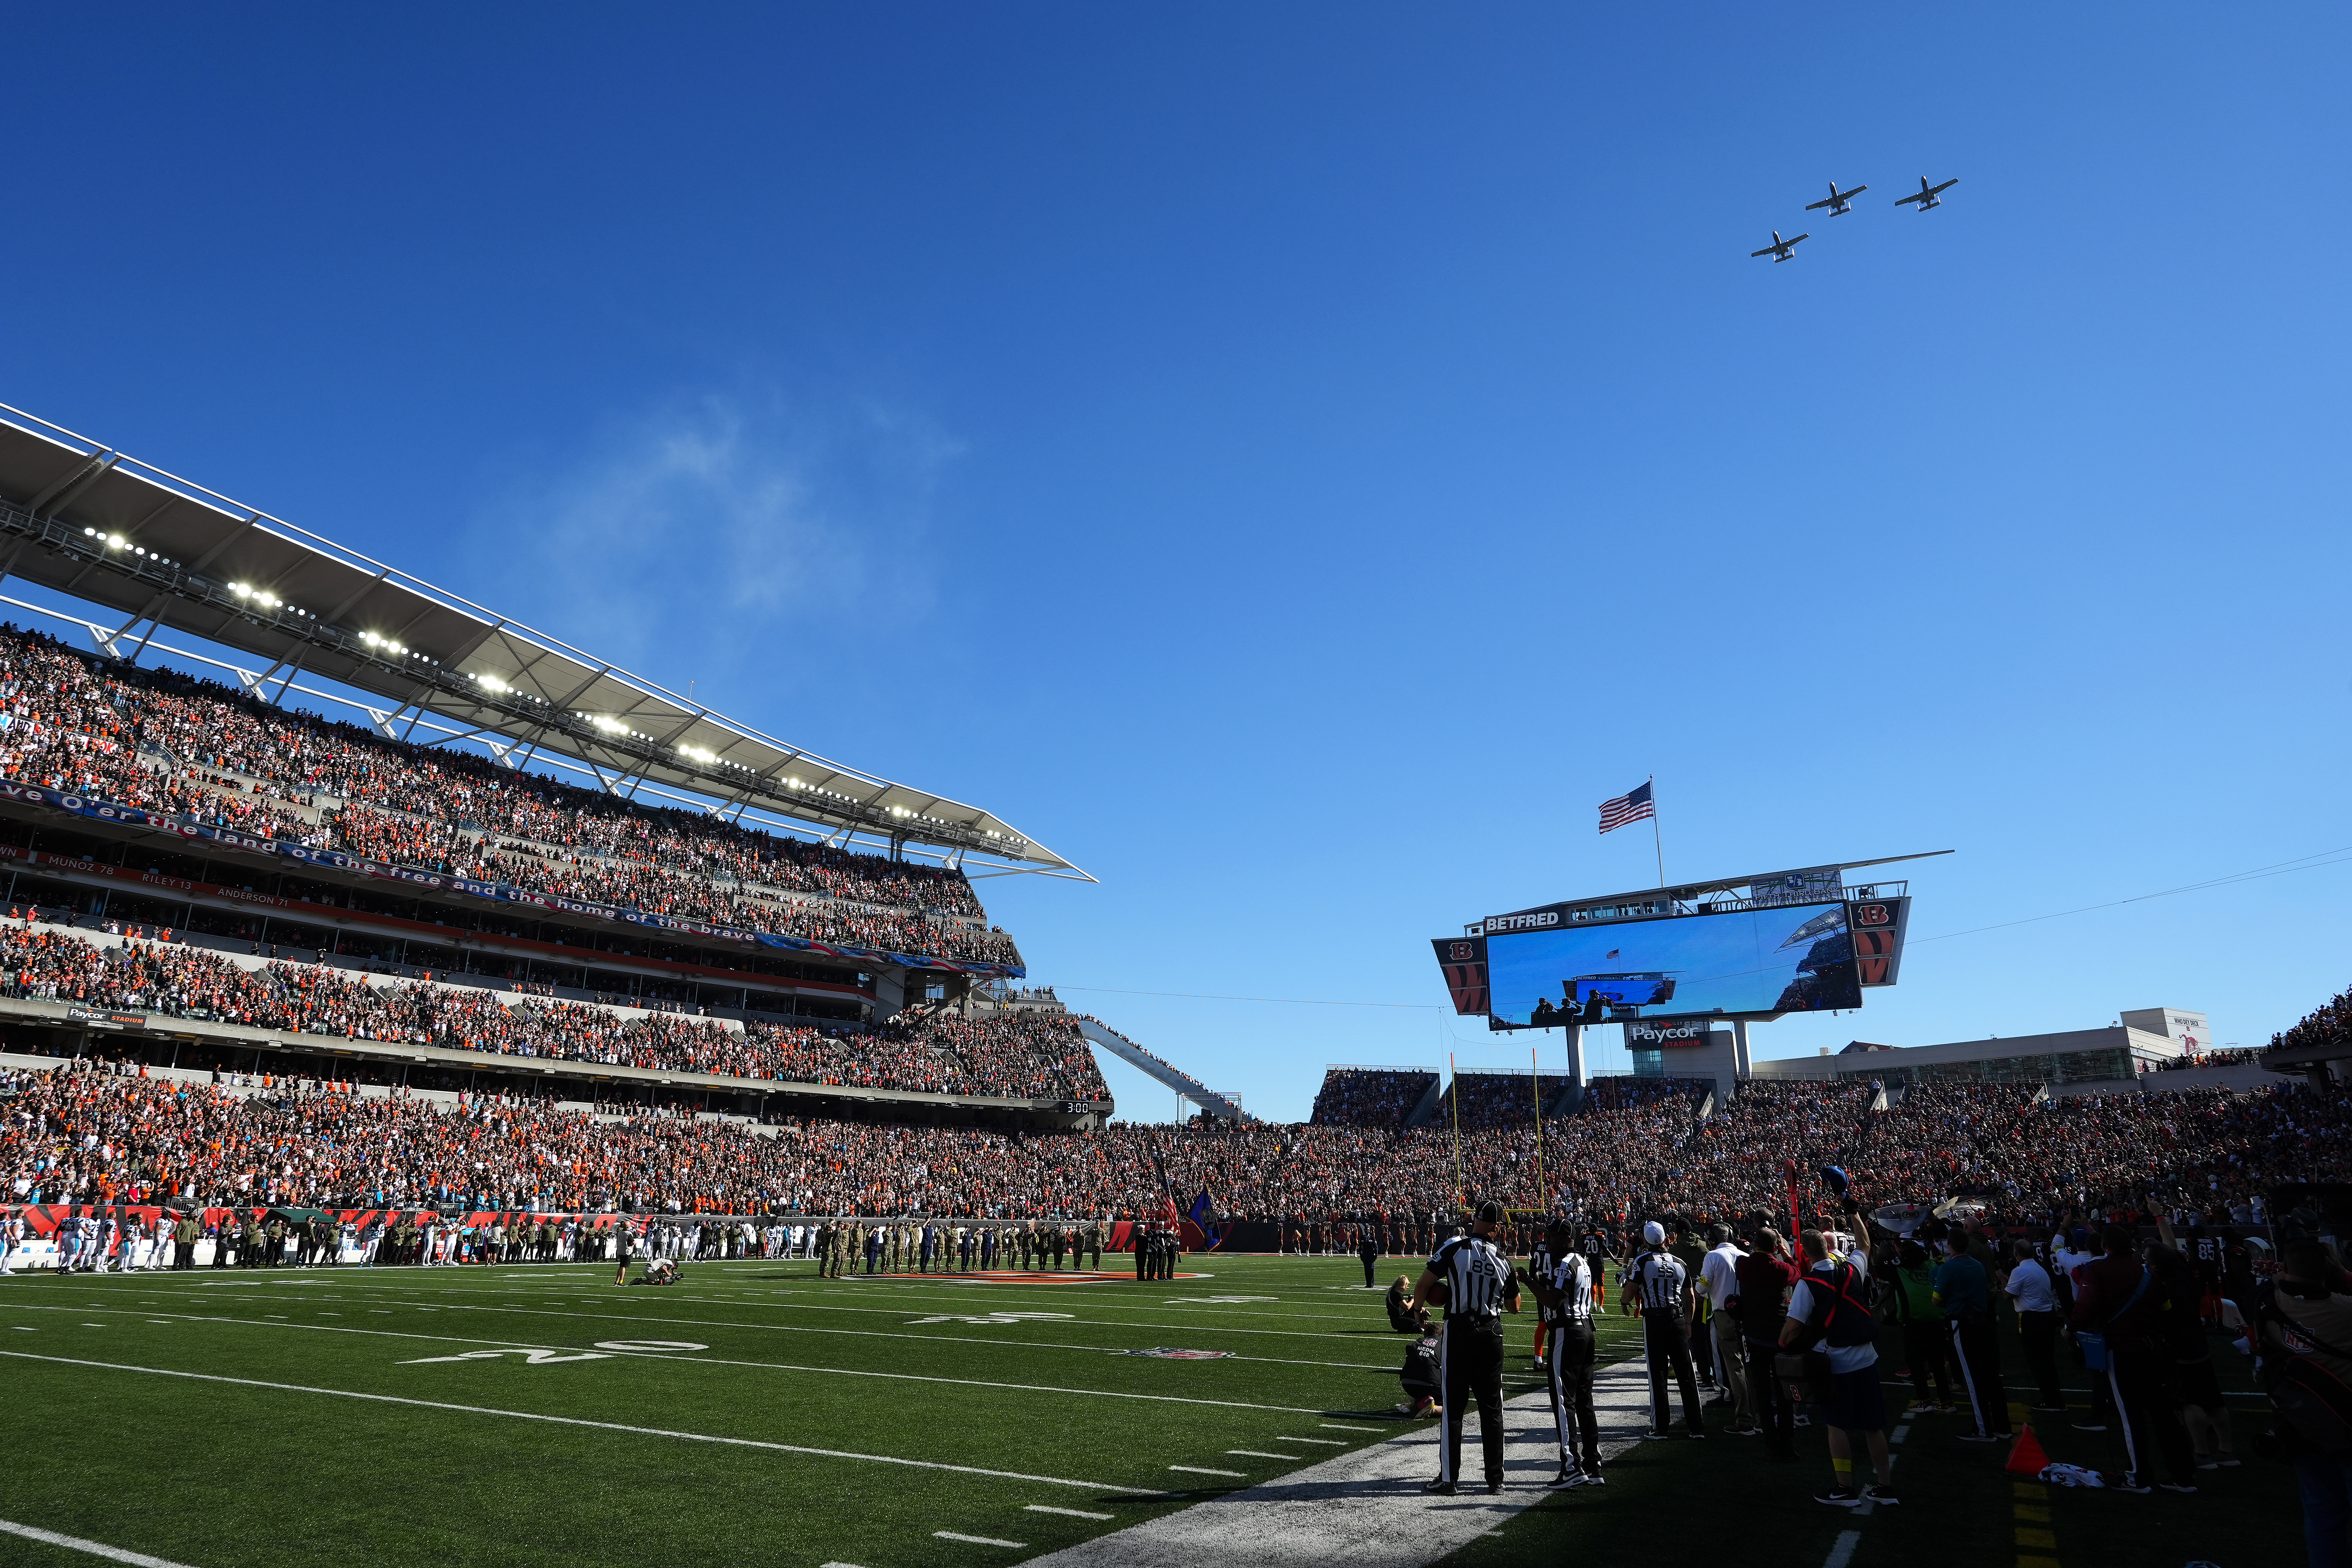 General view of the fly over during the national anthem prior to the game between the Carolina Panthers and the Cincinnati Bengals at Paycor Stadium on November 06, 2022 in Cincinnati, Ohio.